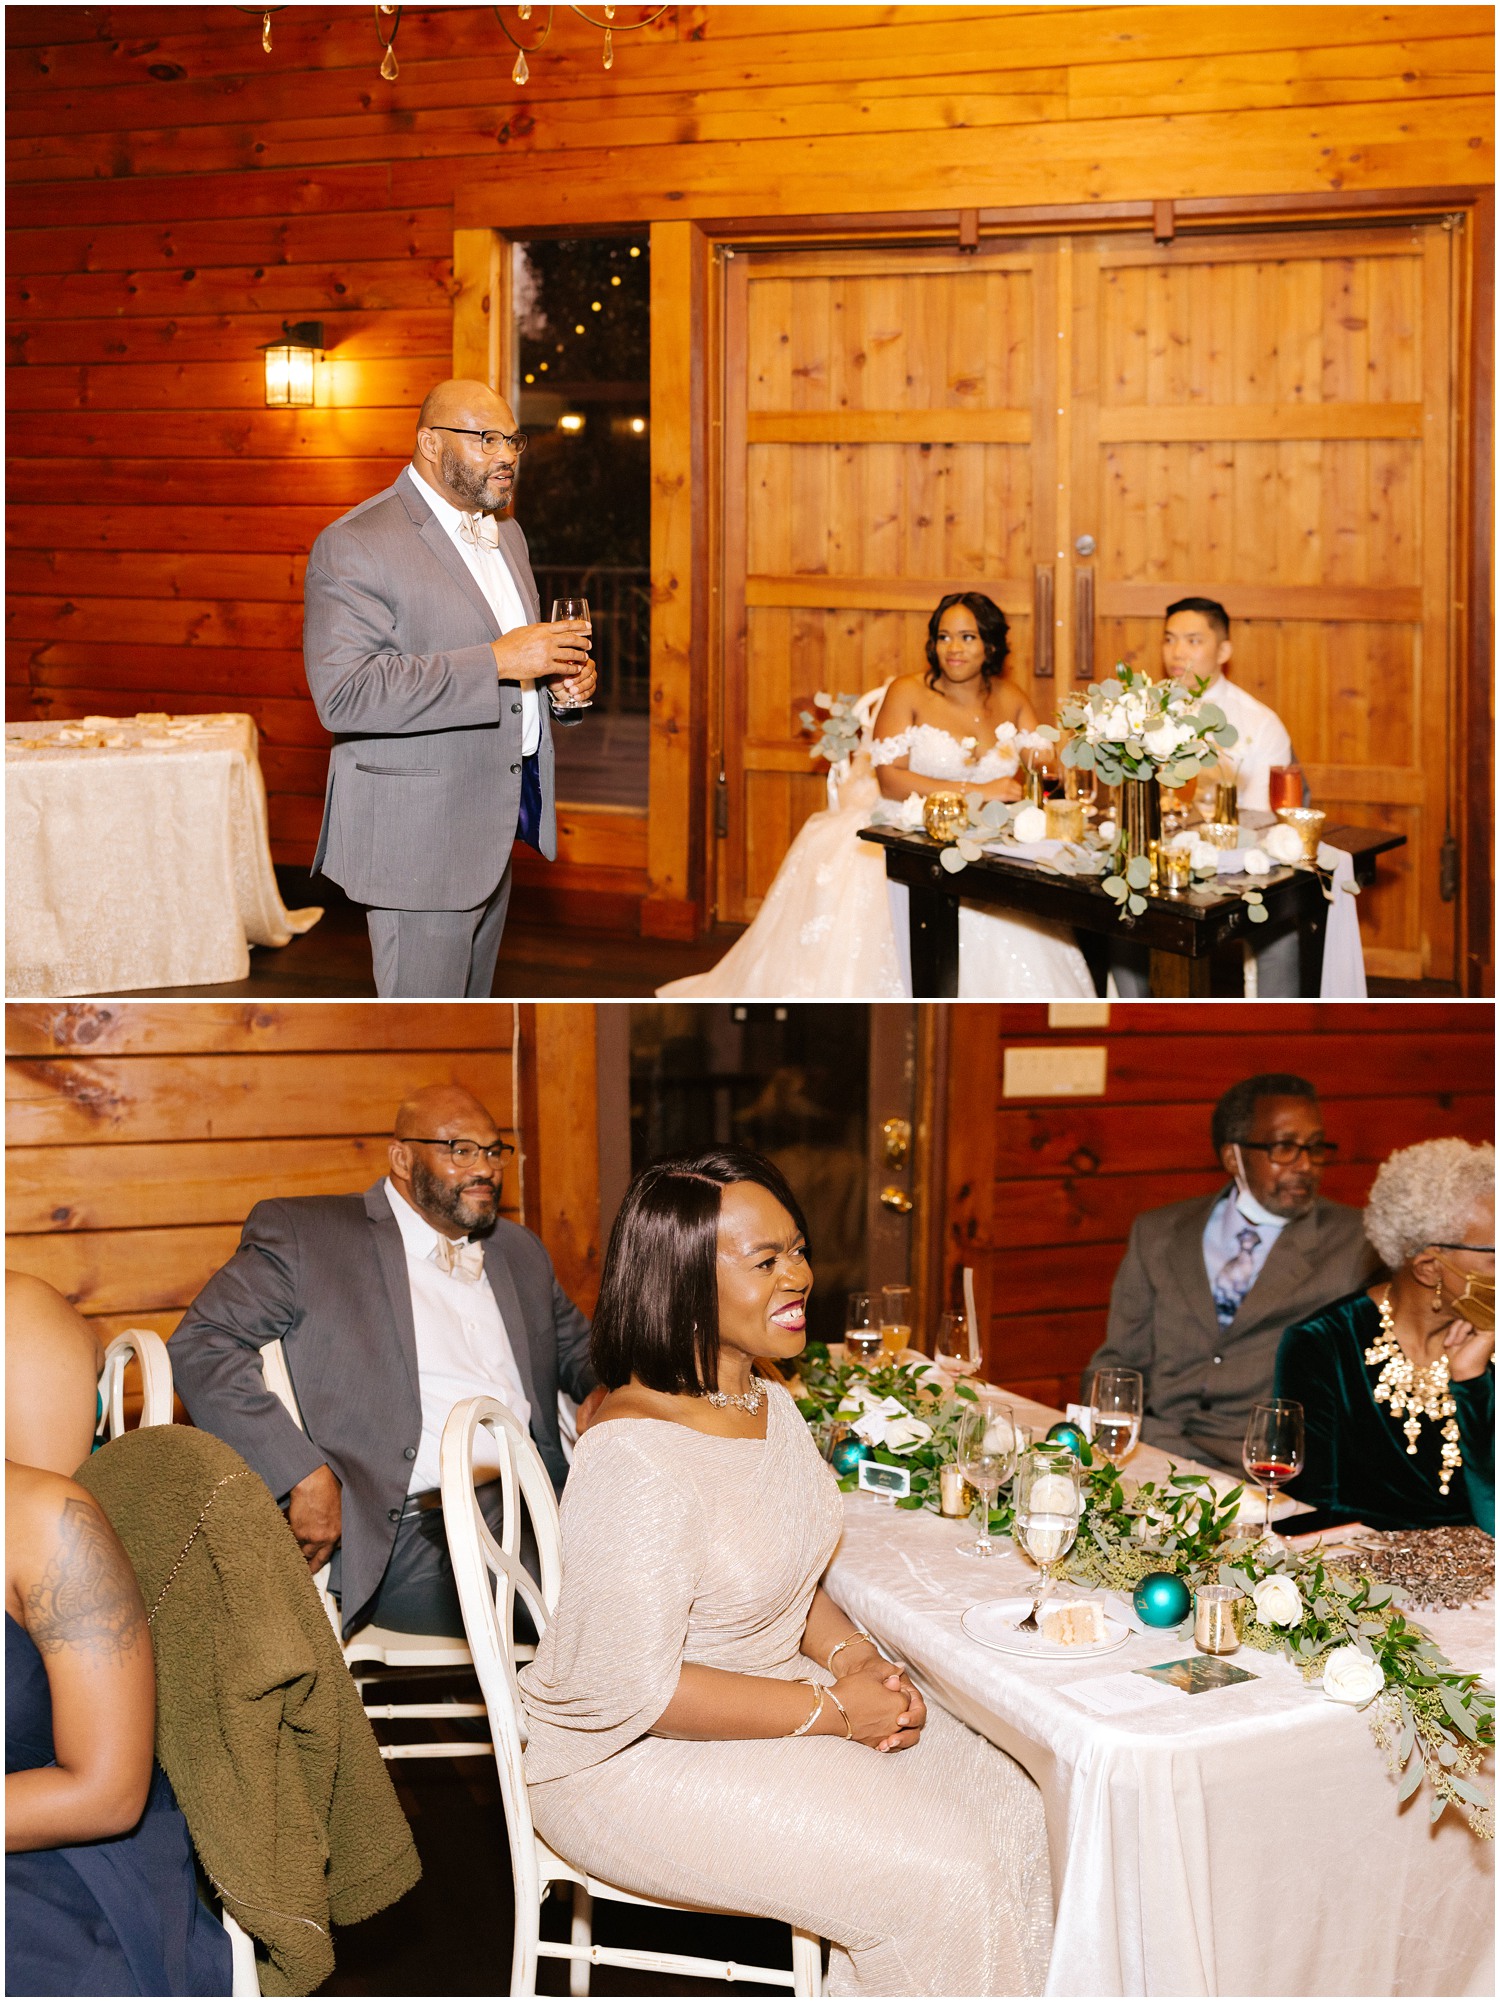 Candid moments of toasts at Wedding in Raleigh, NC.